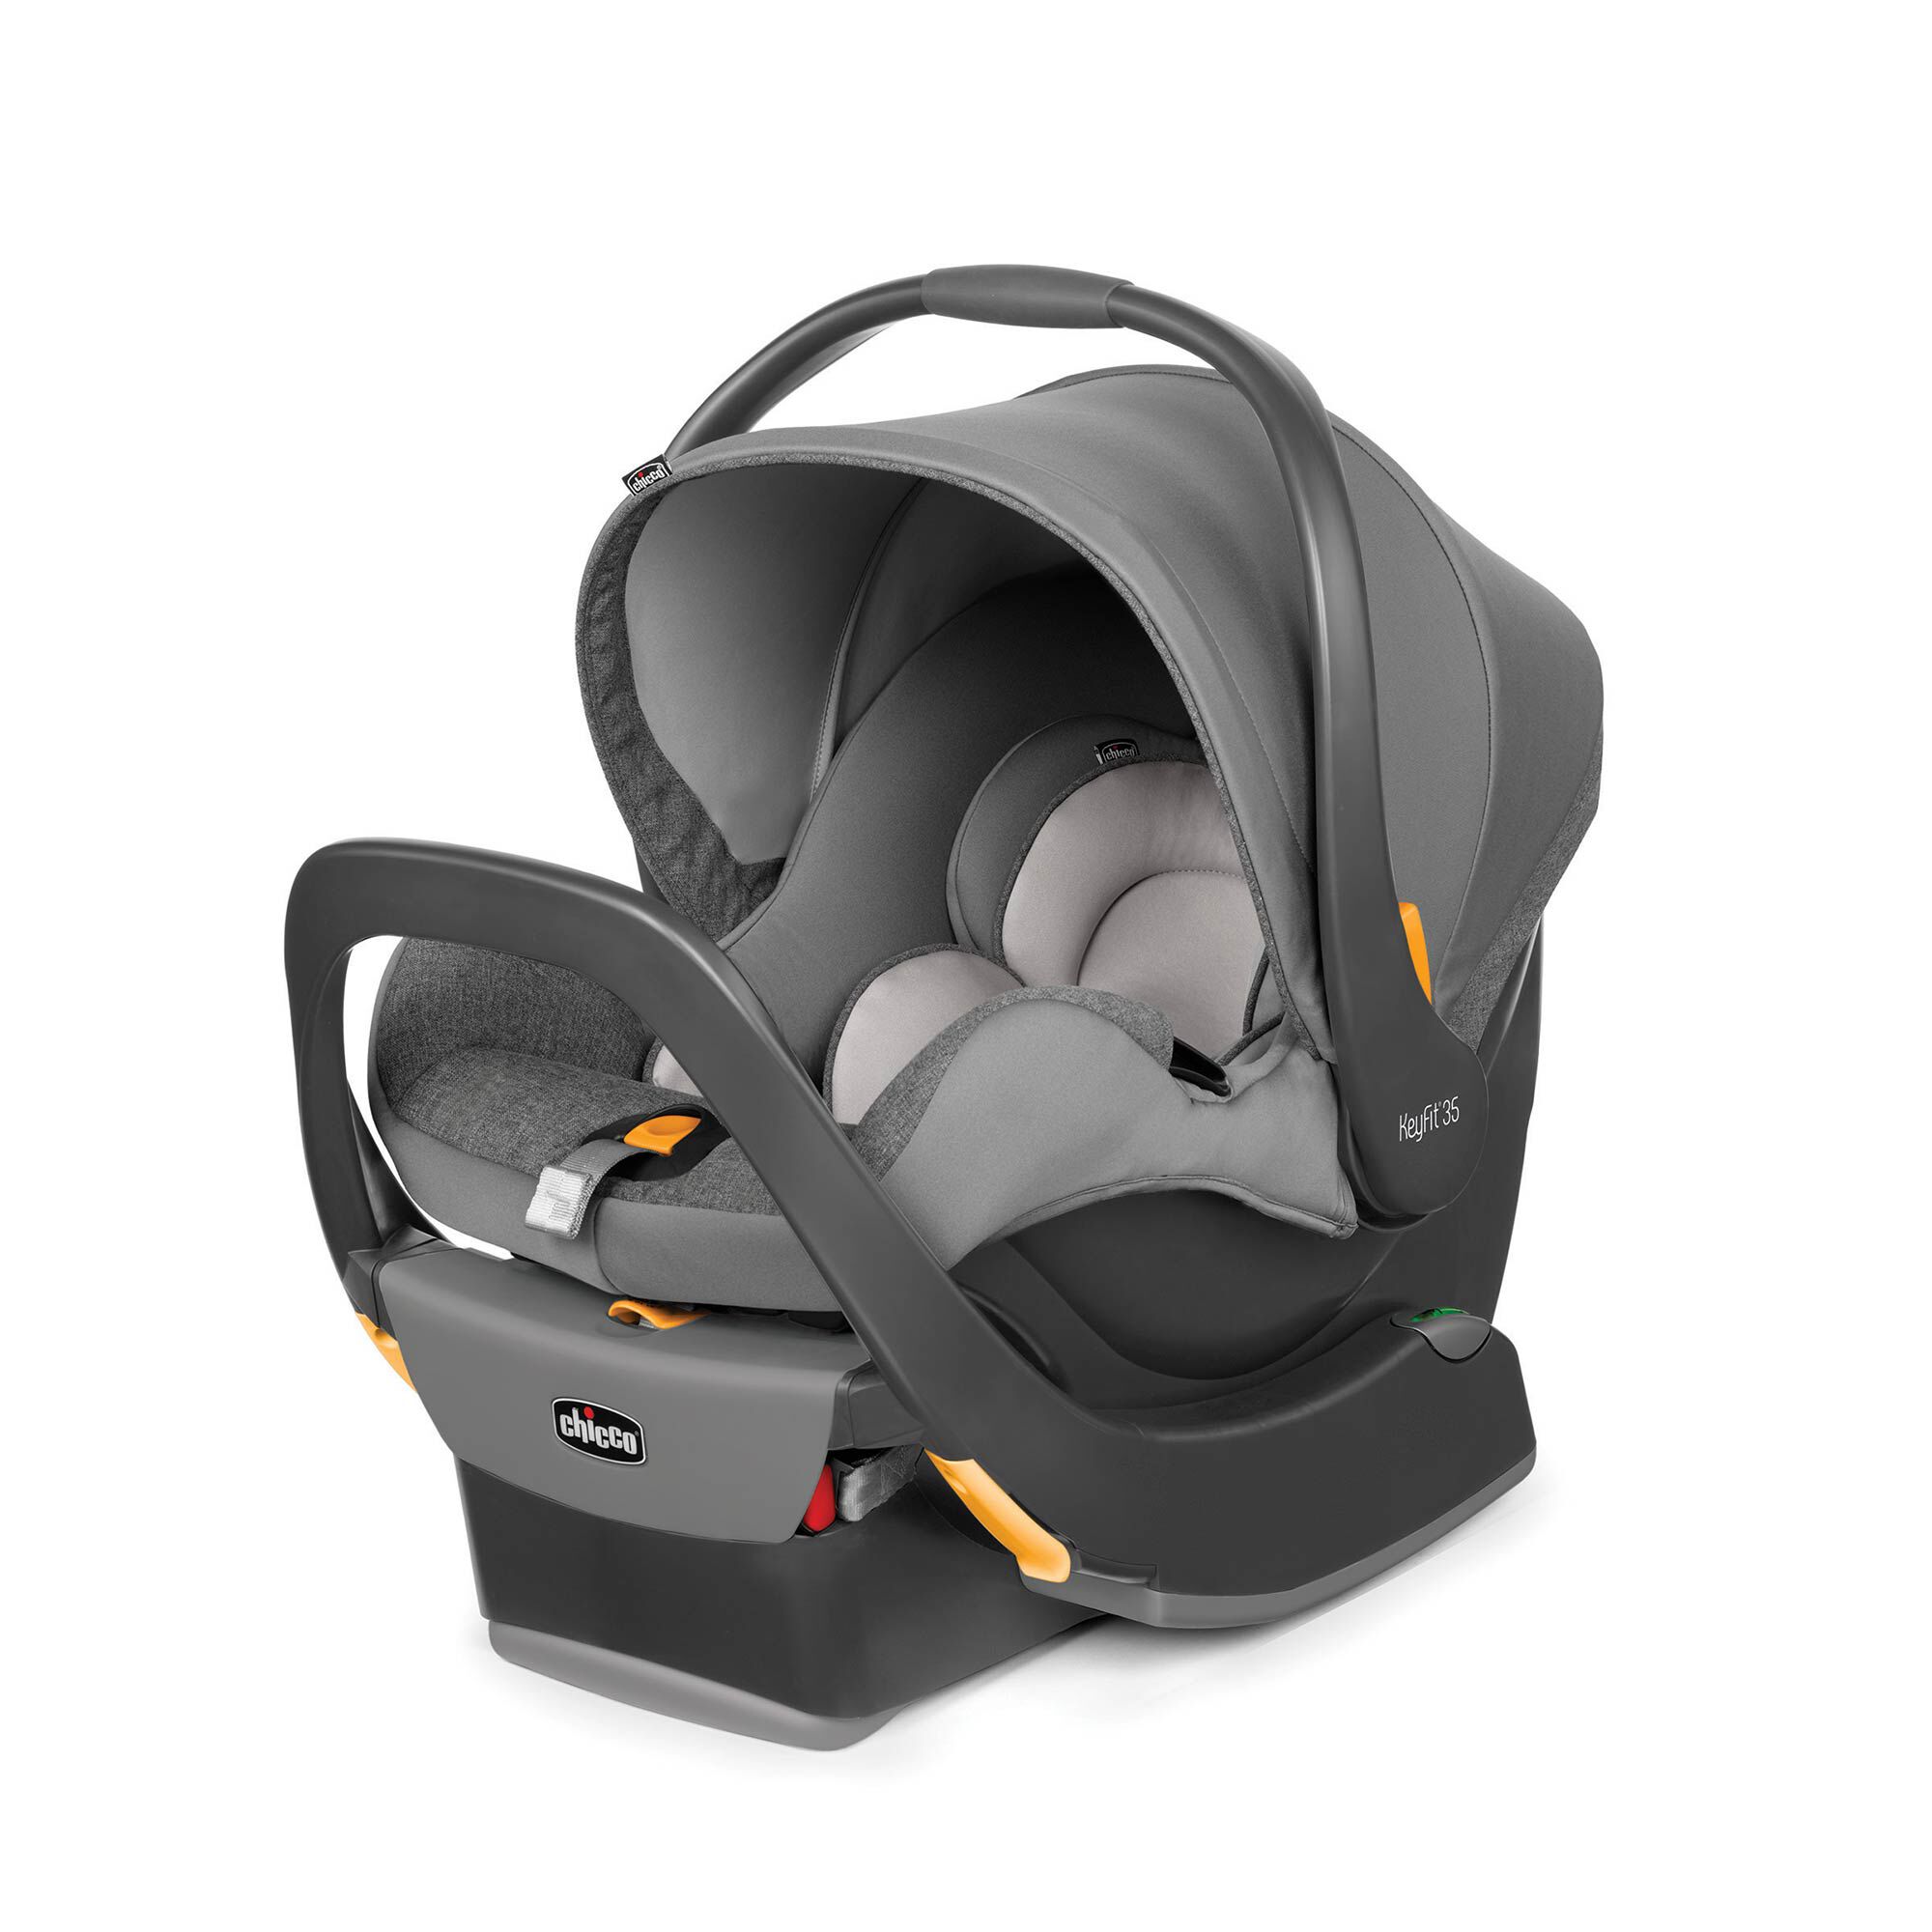 KeyFit 35 Infant Car Seat | Chicco